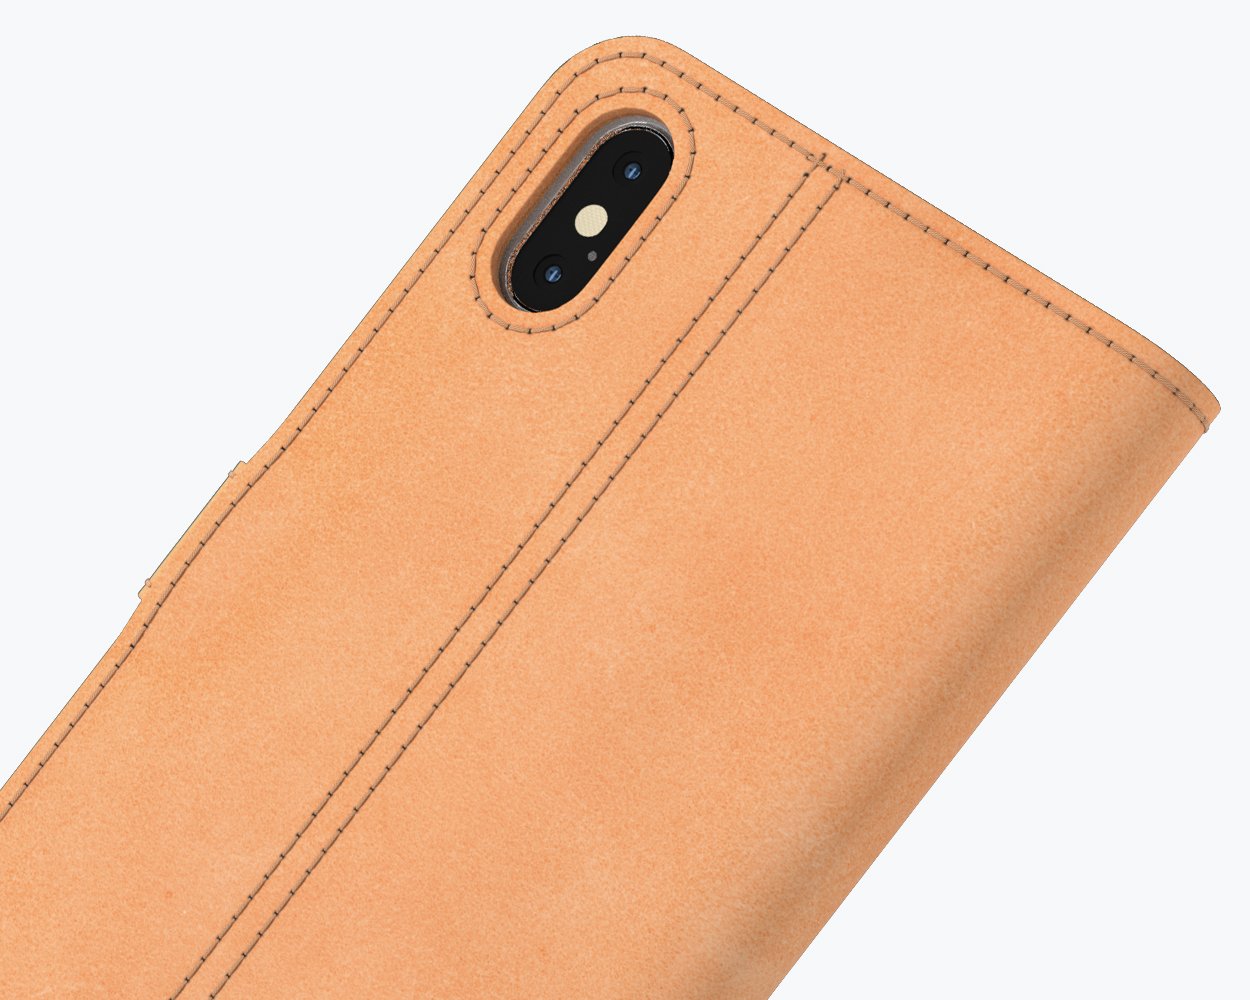 Vintage Leather Wallet - Apple iPhone XS Max